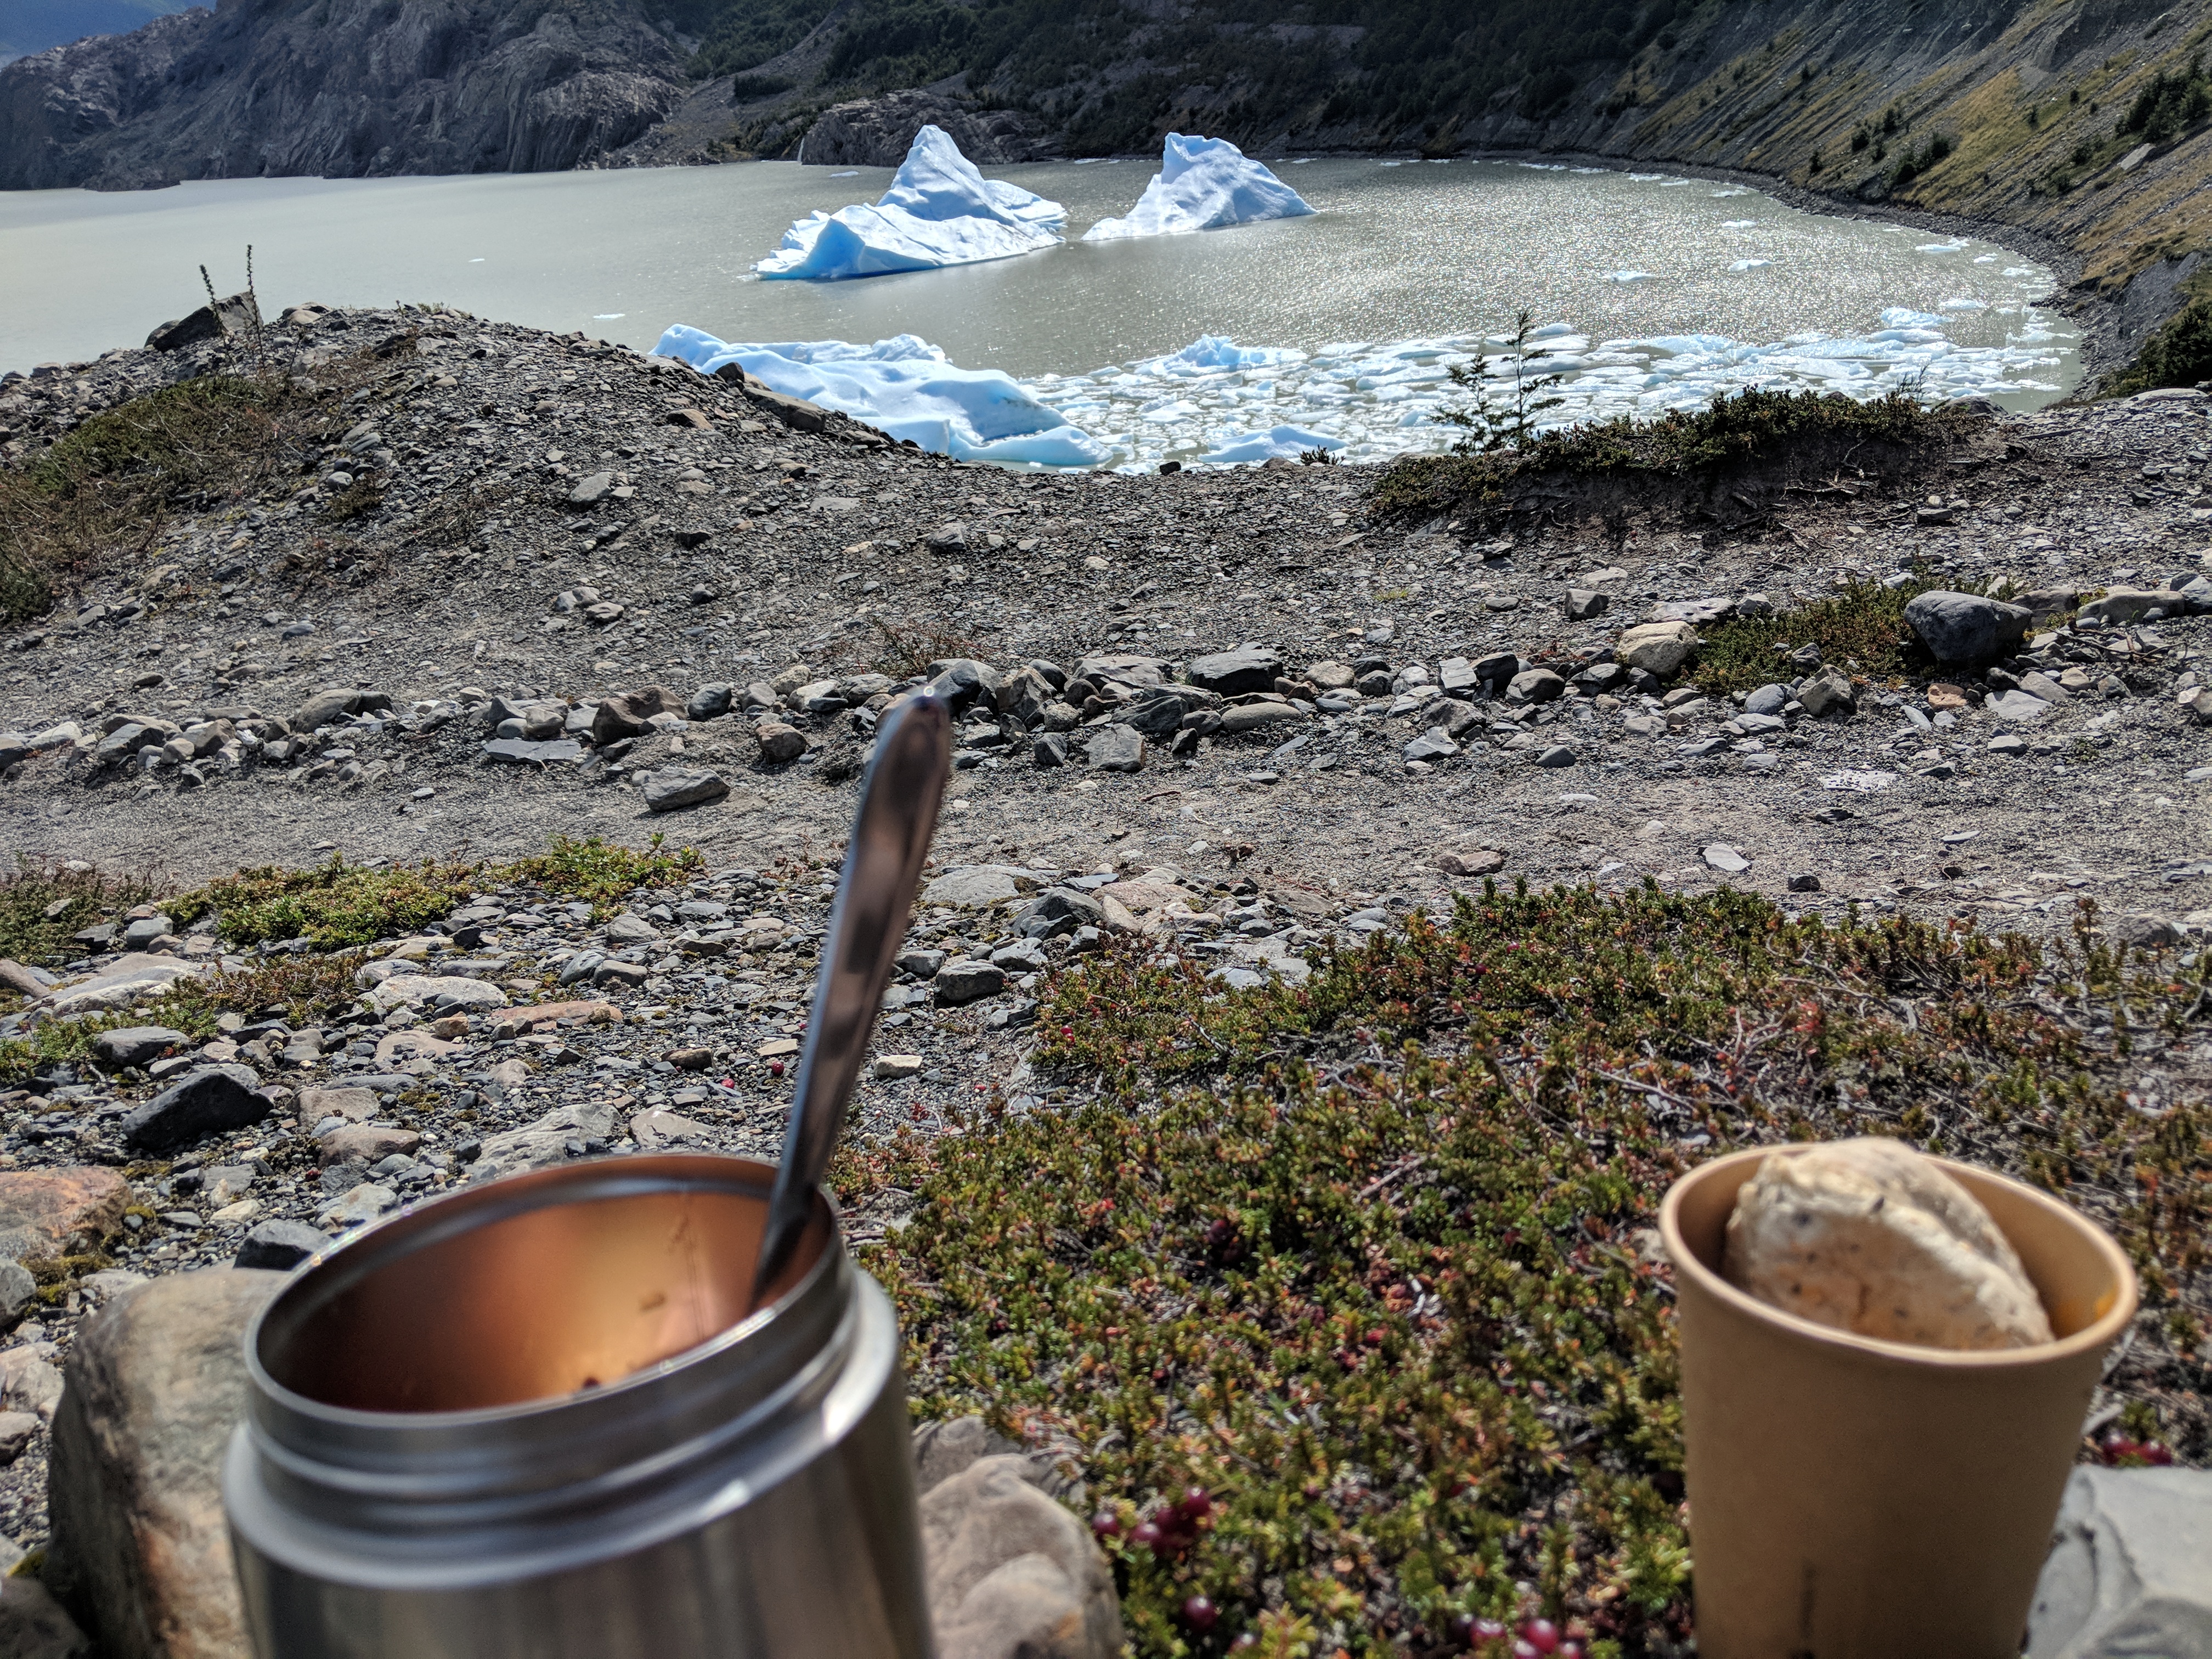 Stopping to eat lunch in front of a lake en-route to Gray Glacier in Patagonia.